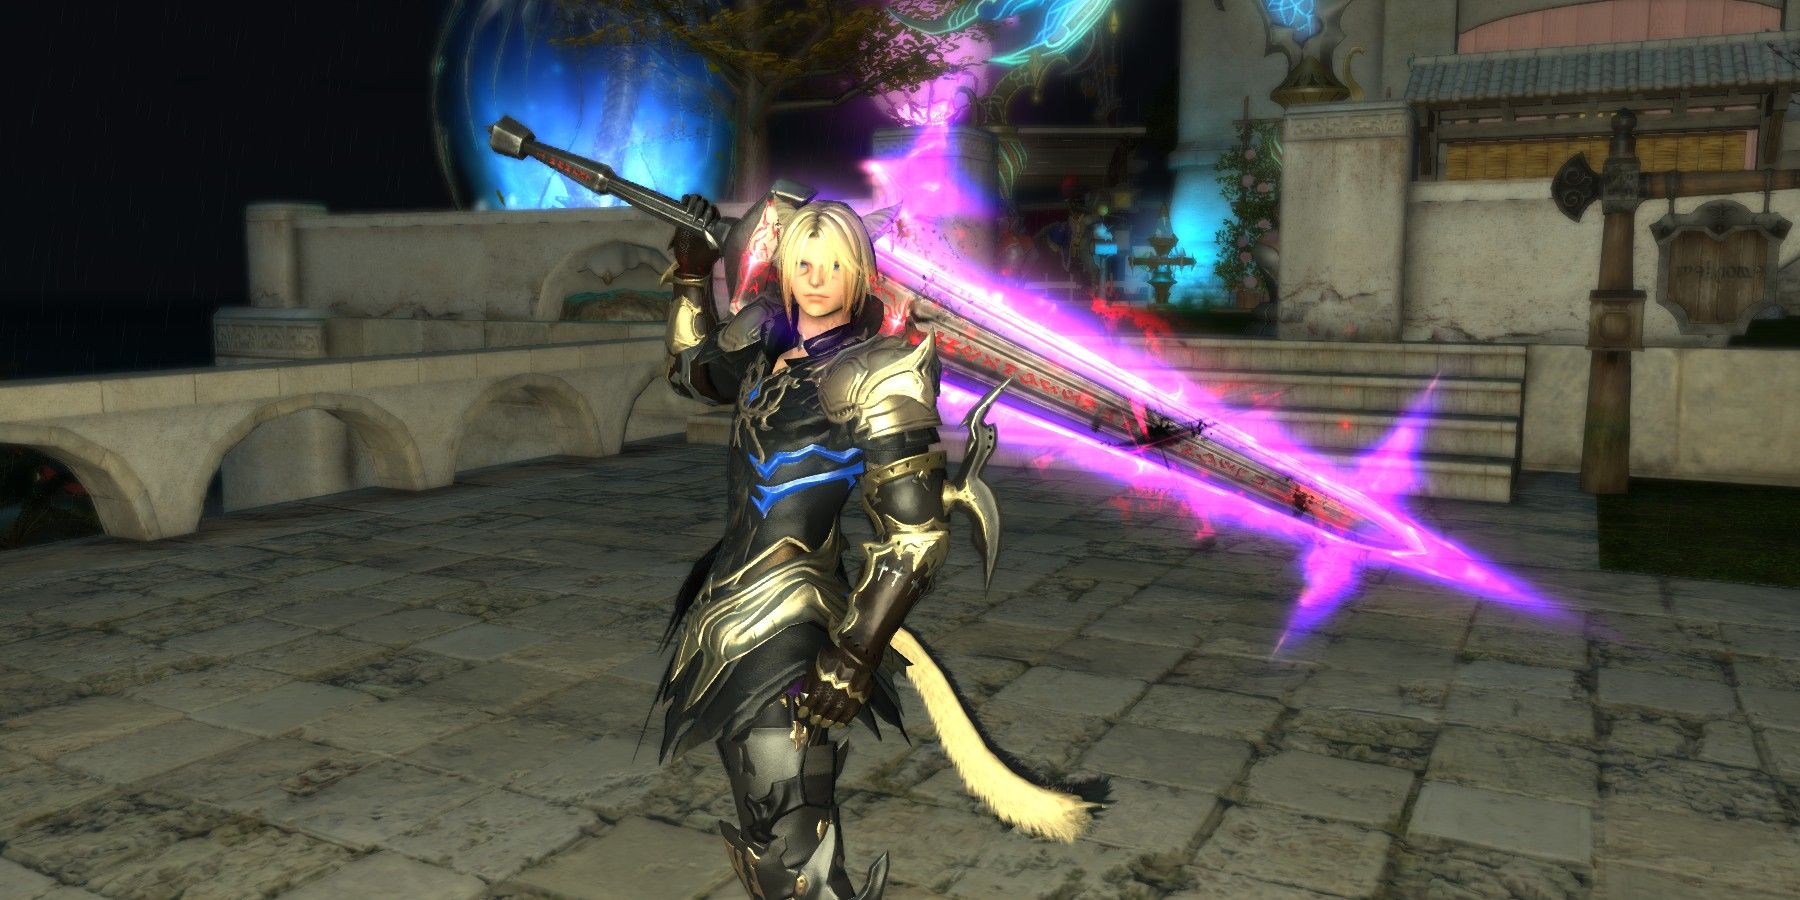 Catboy holding glowing greatsword on his shoulder.